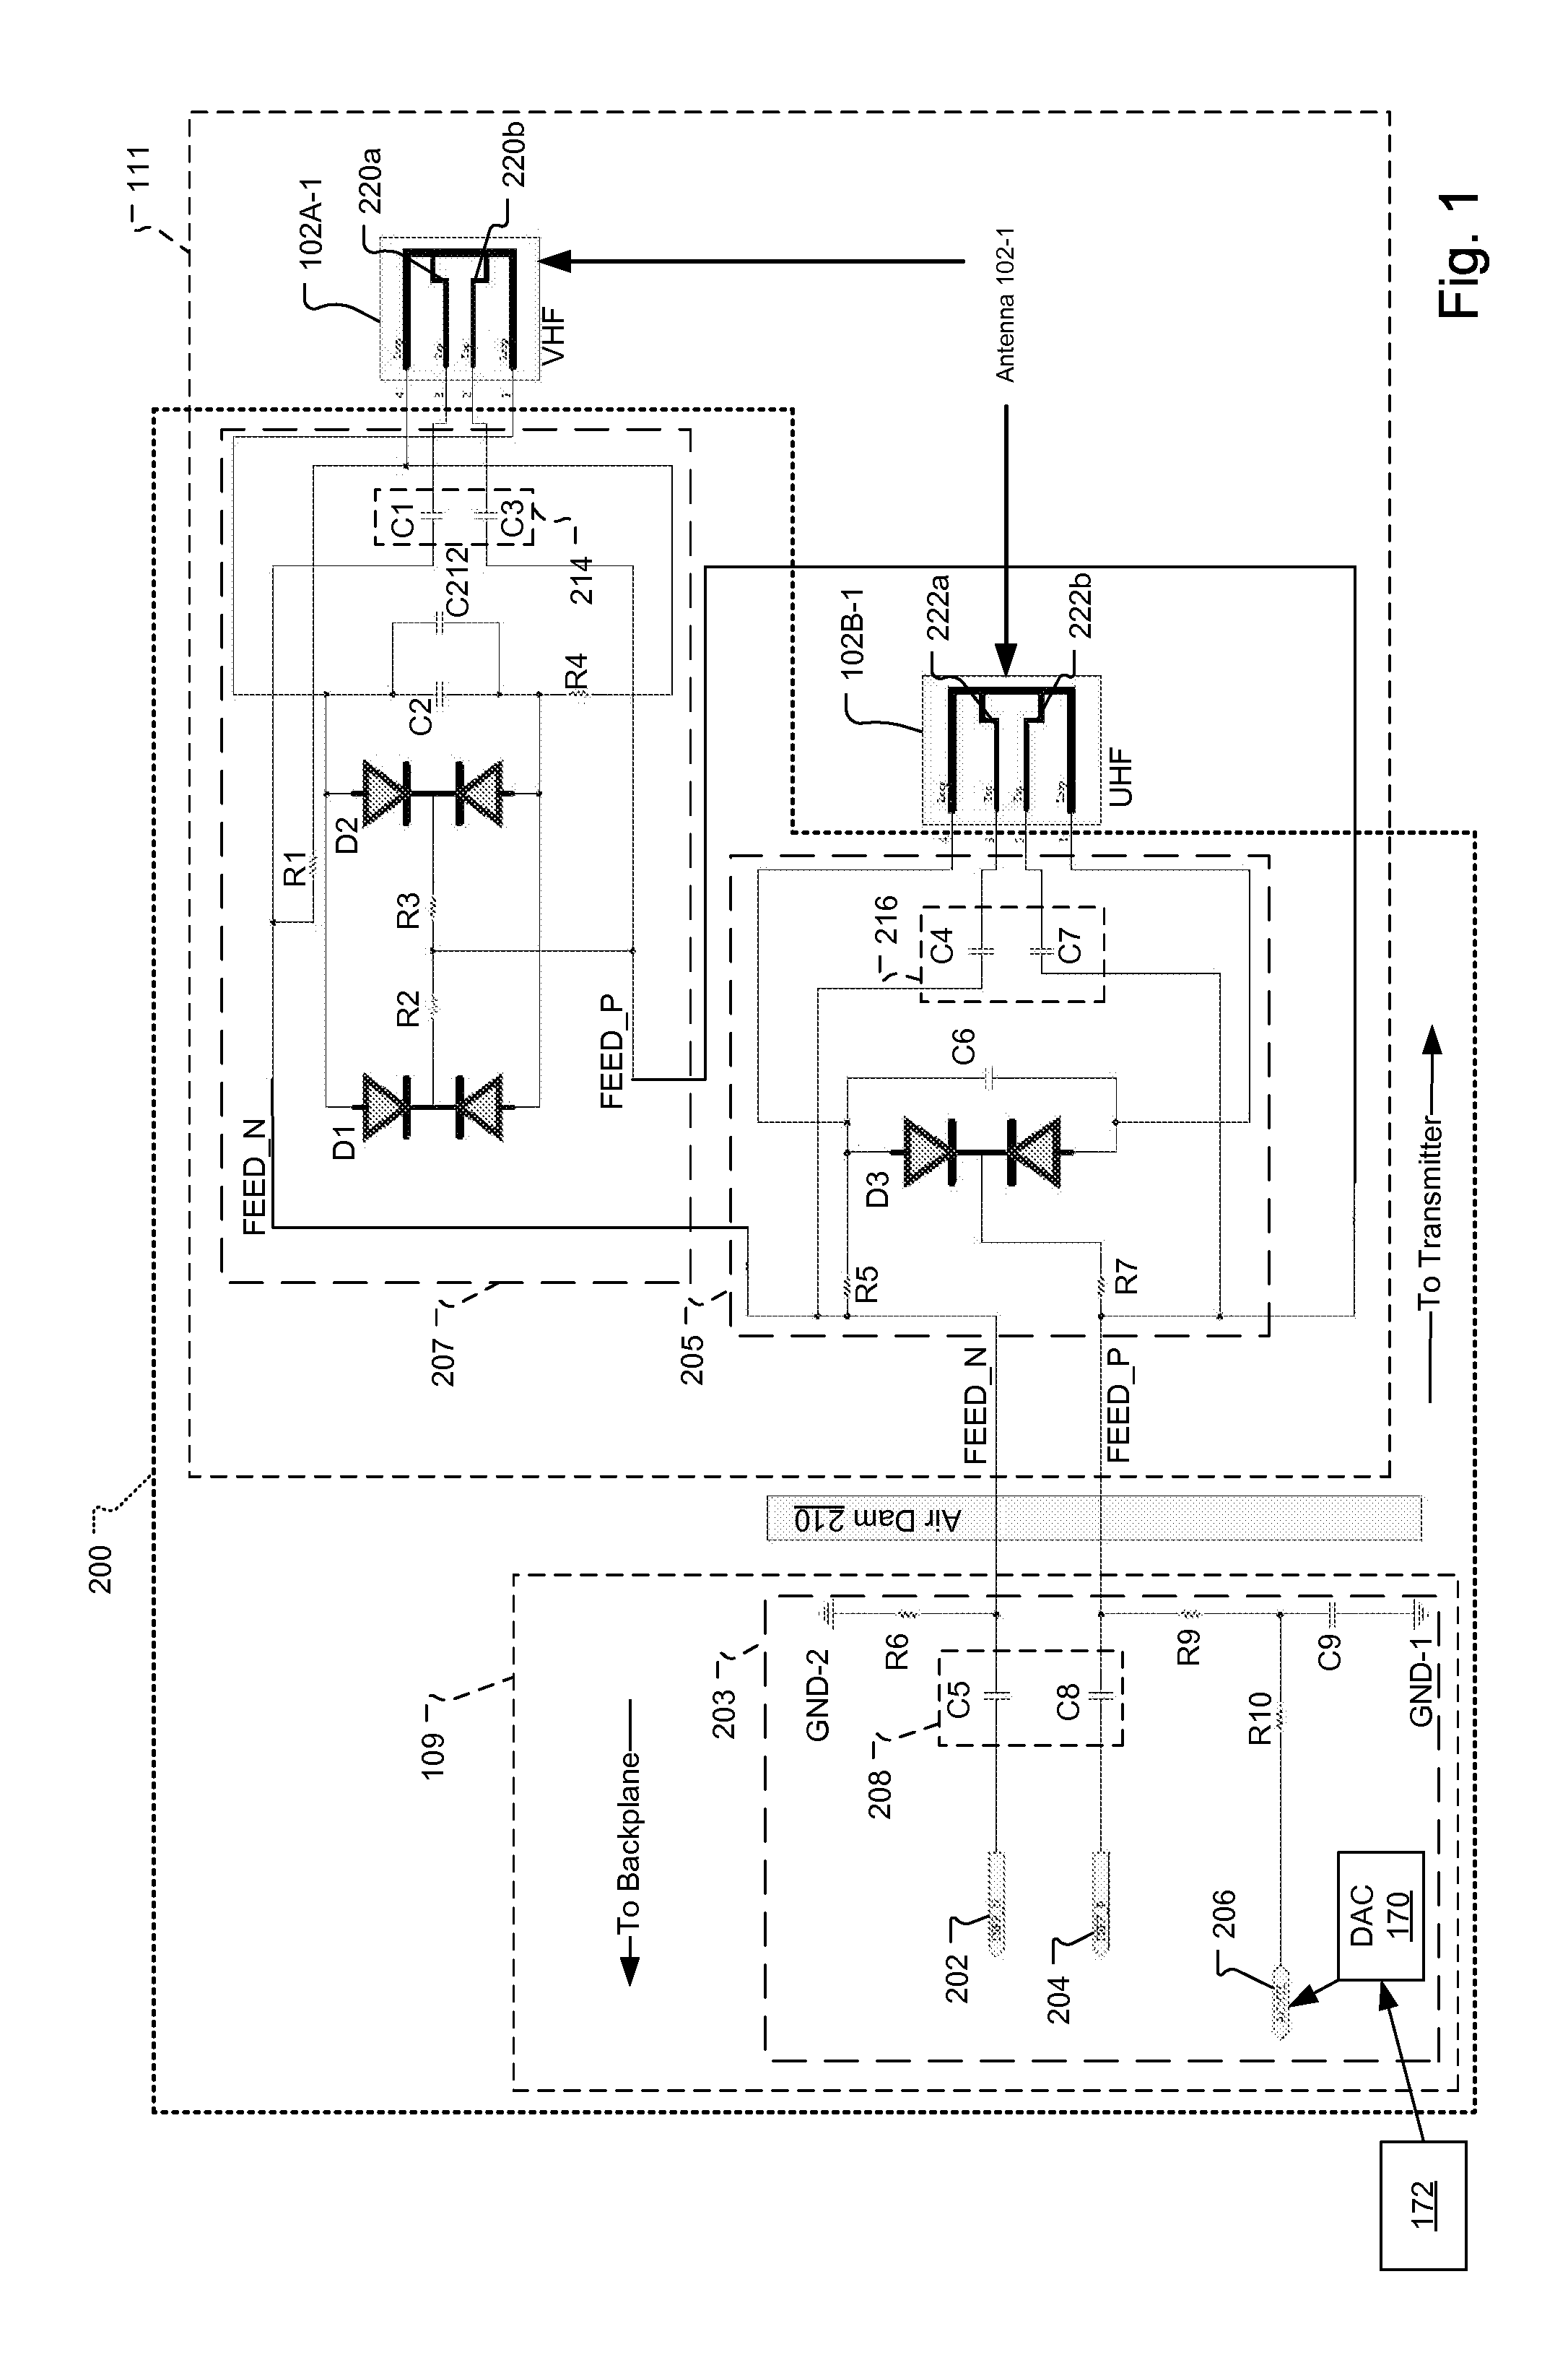 Antenna System with Small Multi-Band Antennas